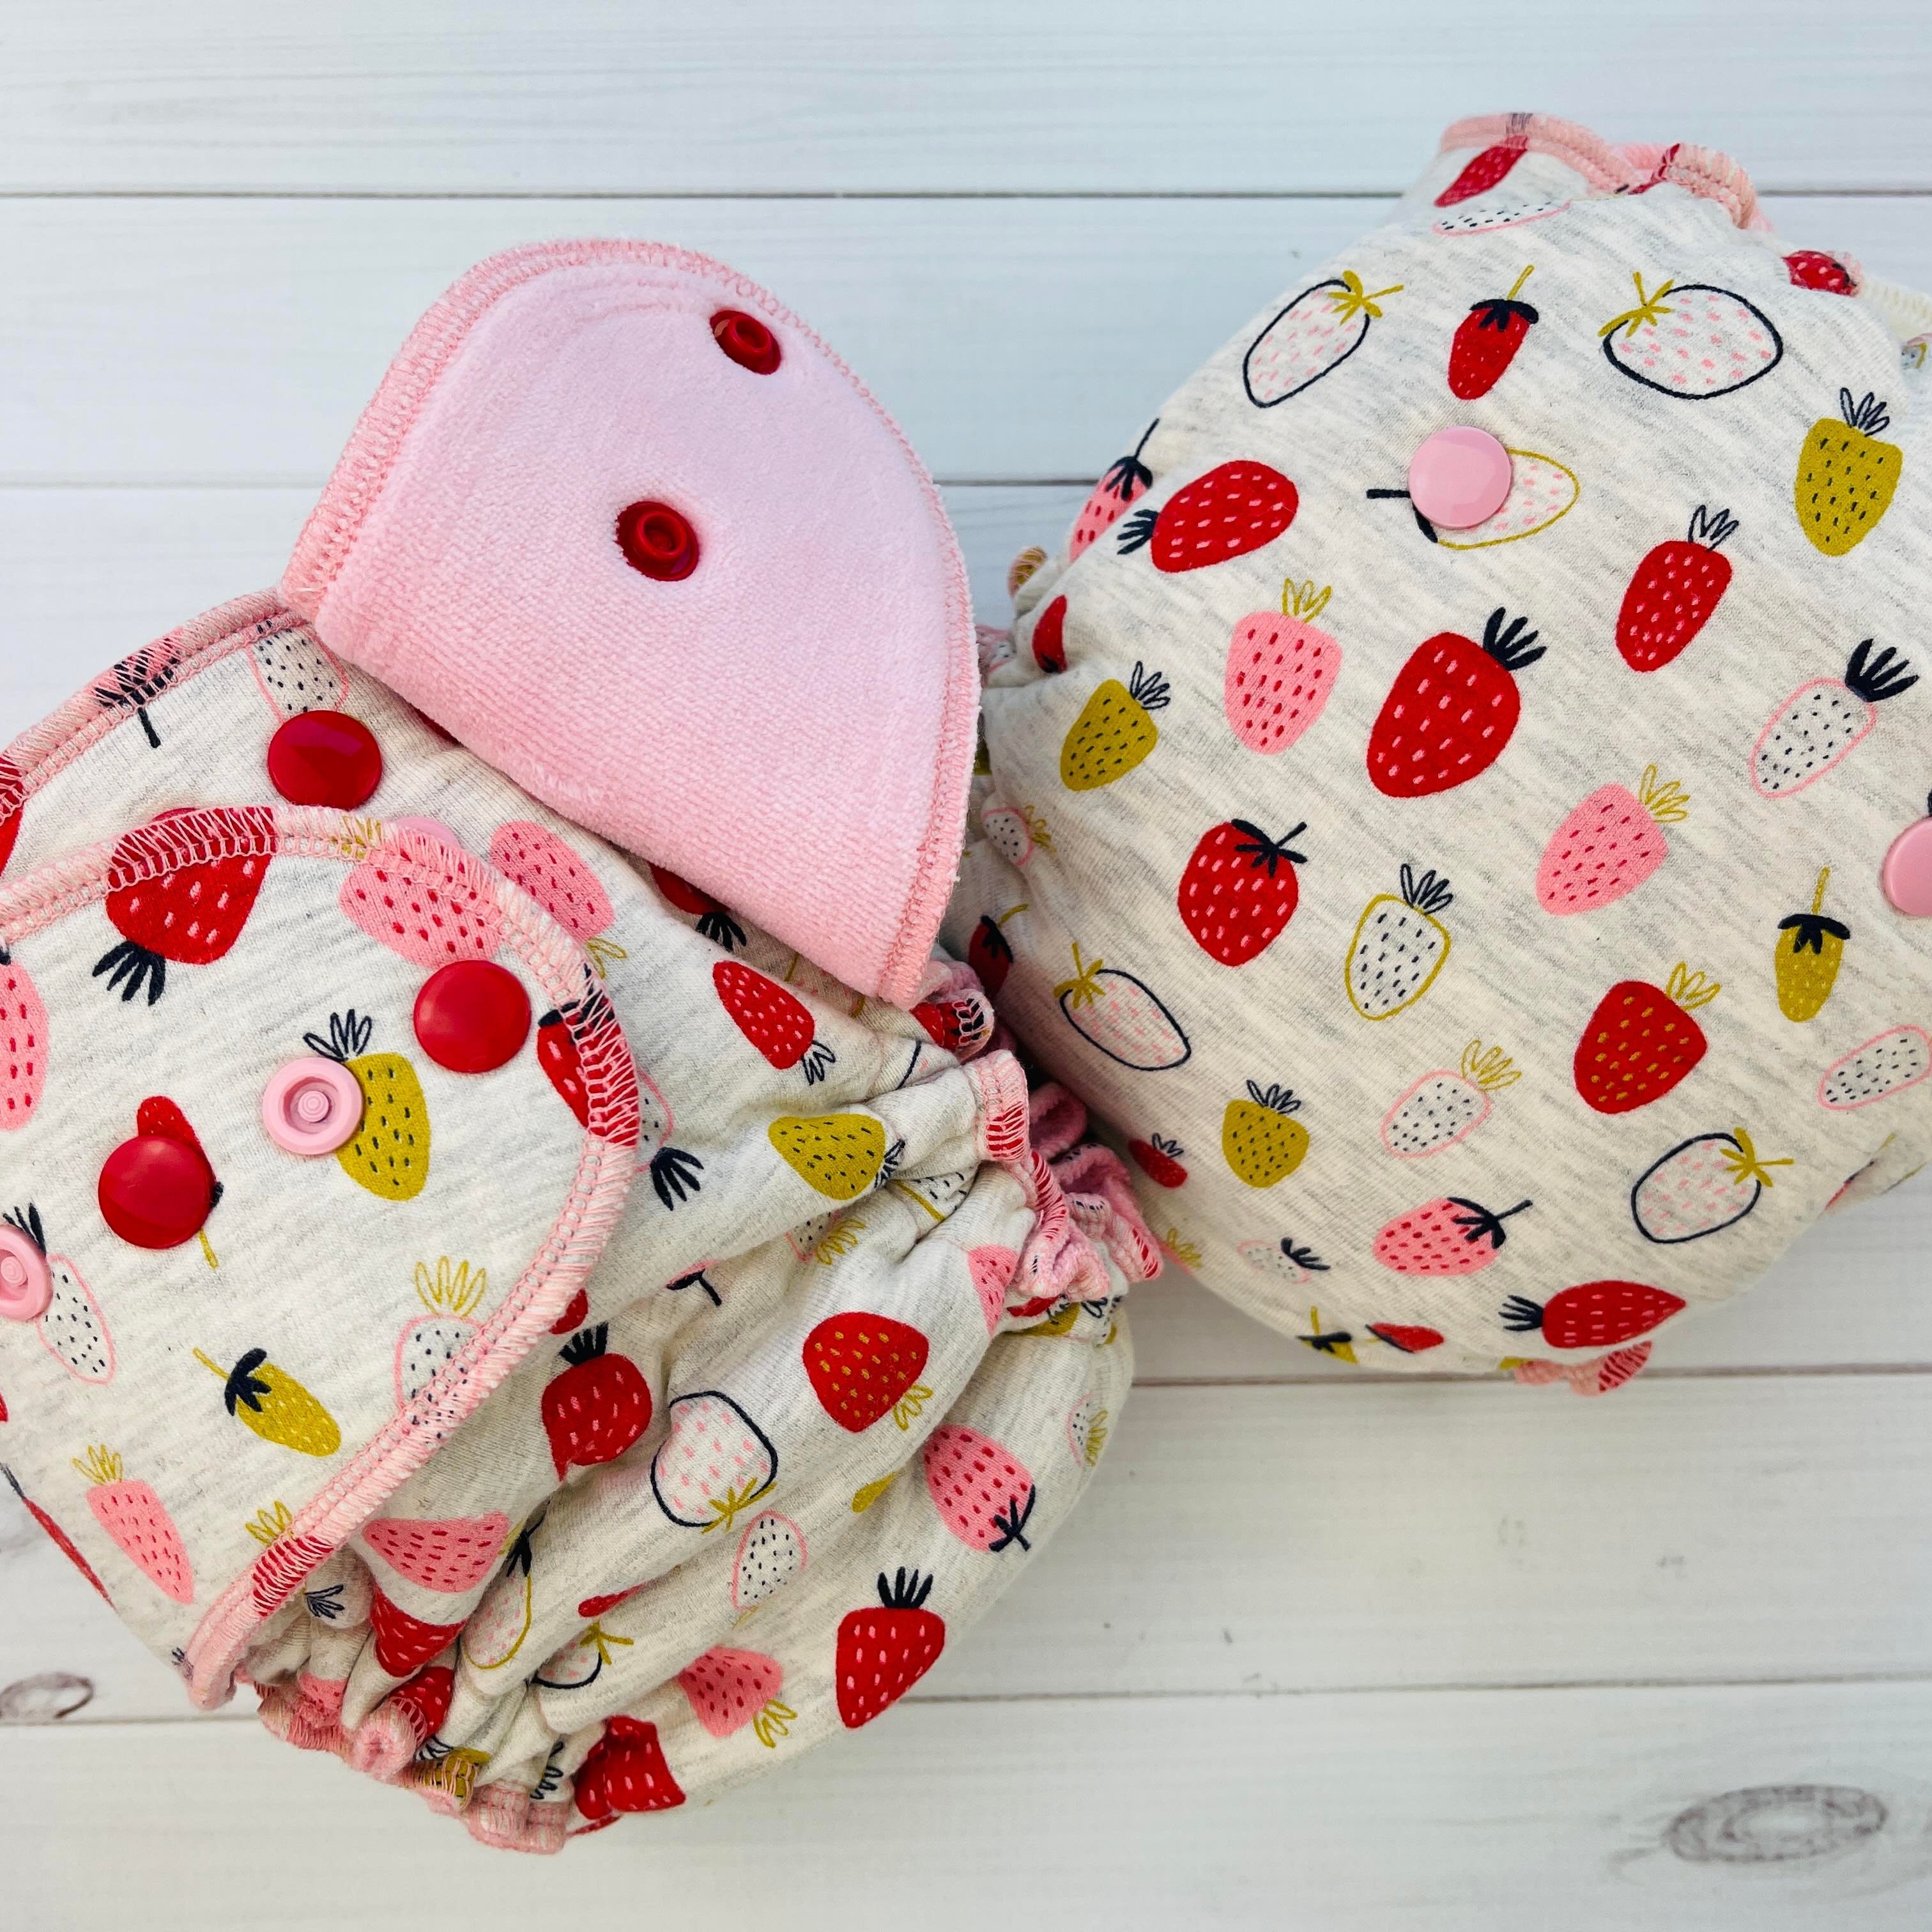 Lilly & Frank cloth diaper Hybrid Serged Yummy Strawberries Toddler Diaper